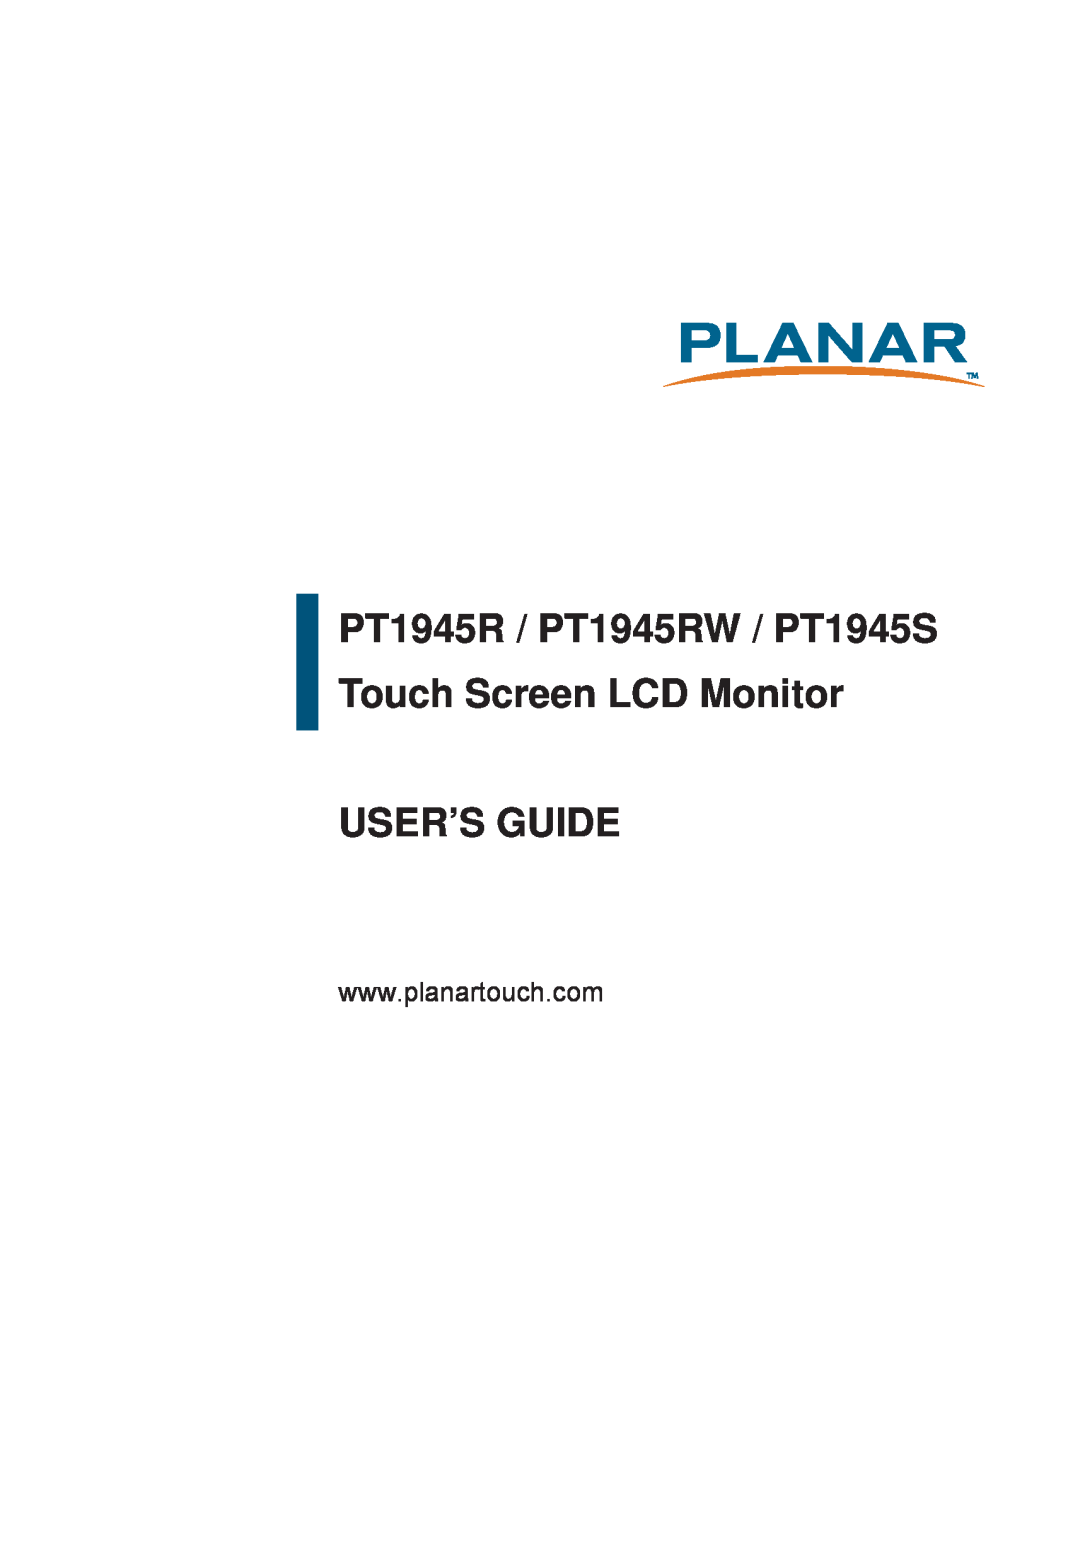 Planar manual PT1945R / PT1945RW / PT1945S Touch Screen LCD Monitor USER’S GUIDE 